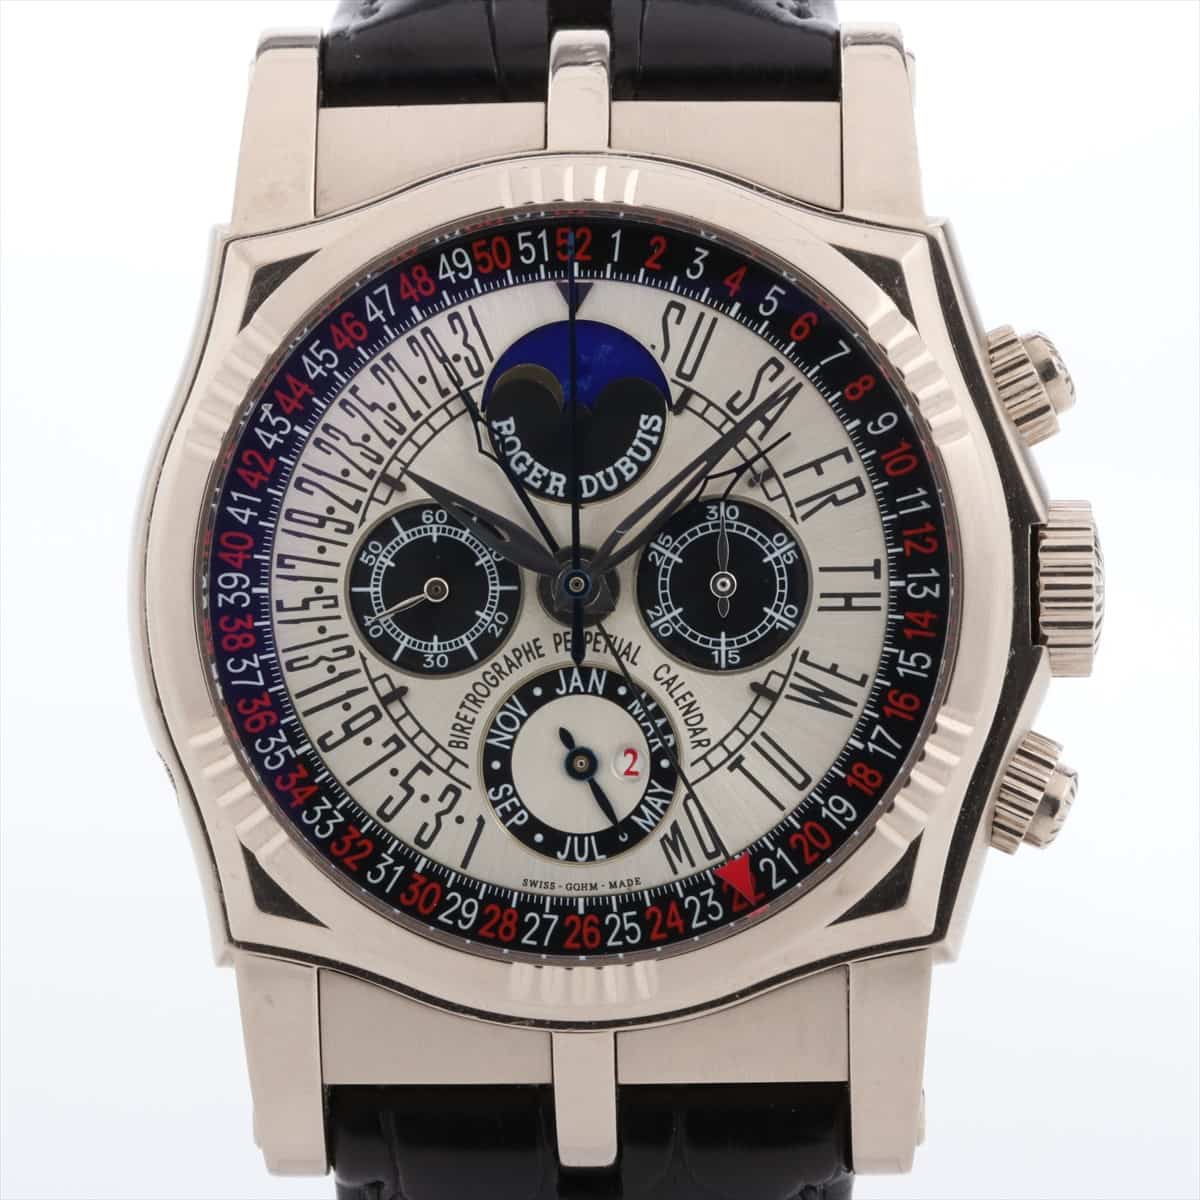 Roger Dubuis sympathy PERPETUAL CALENDAR S43.5610.03.53 750 & leather AT Silver-Face